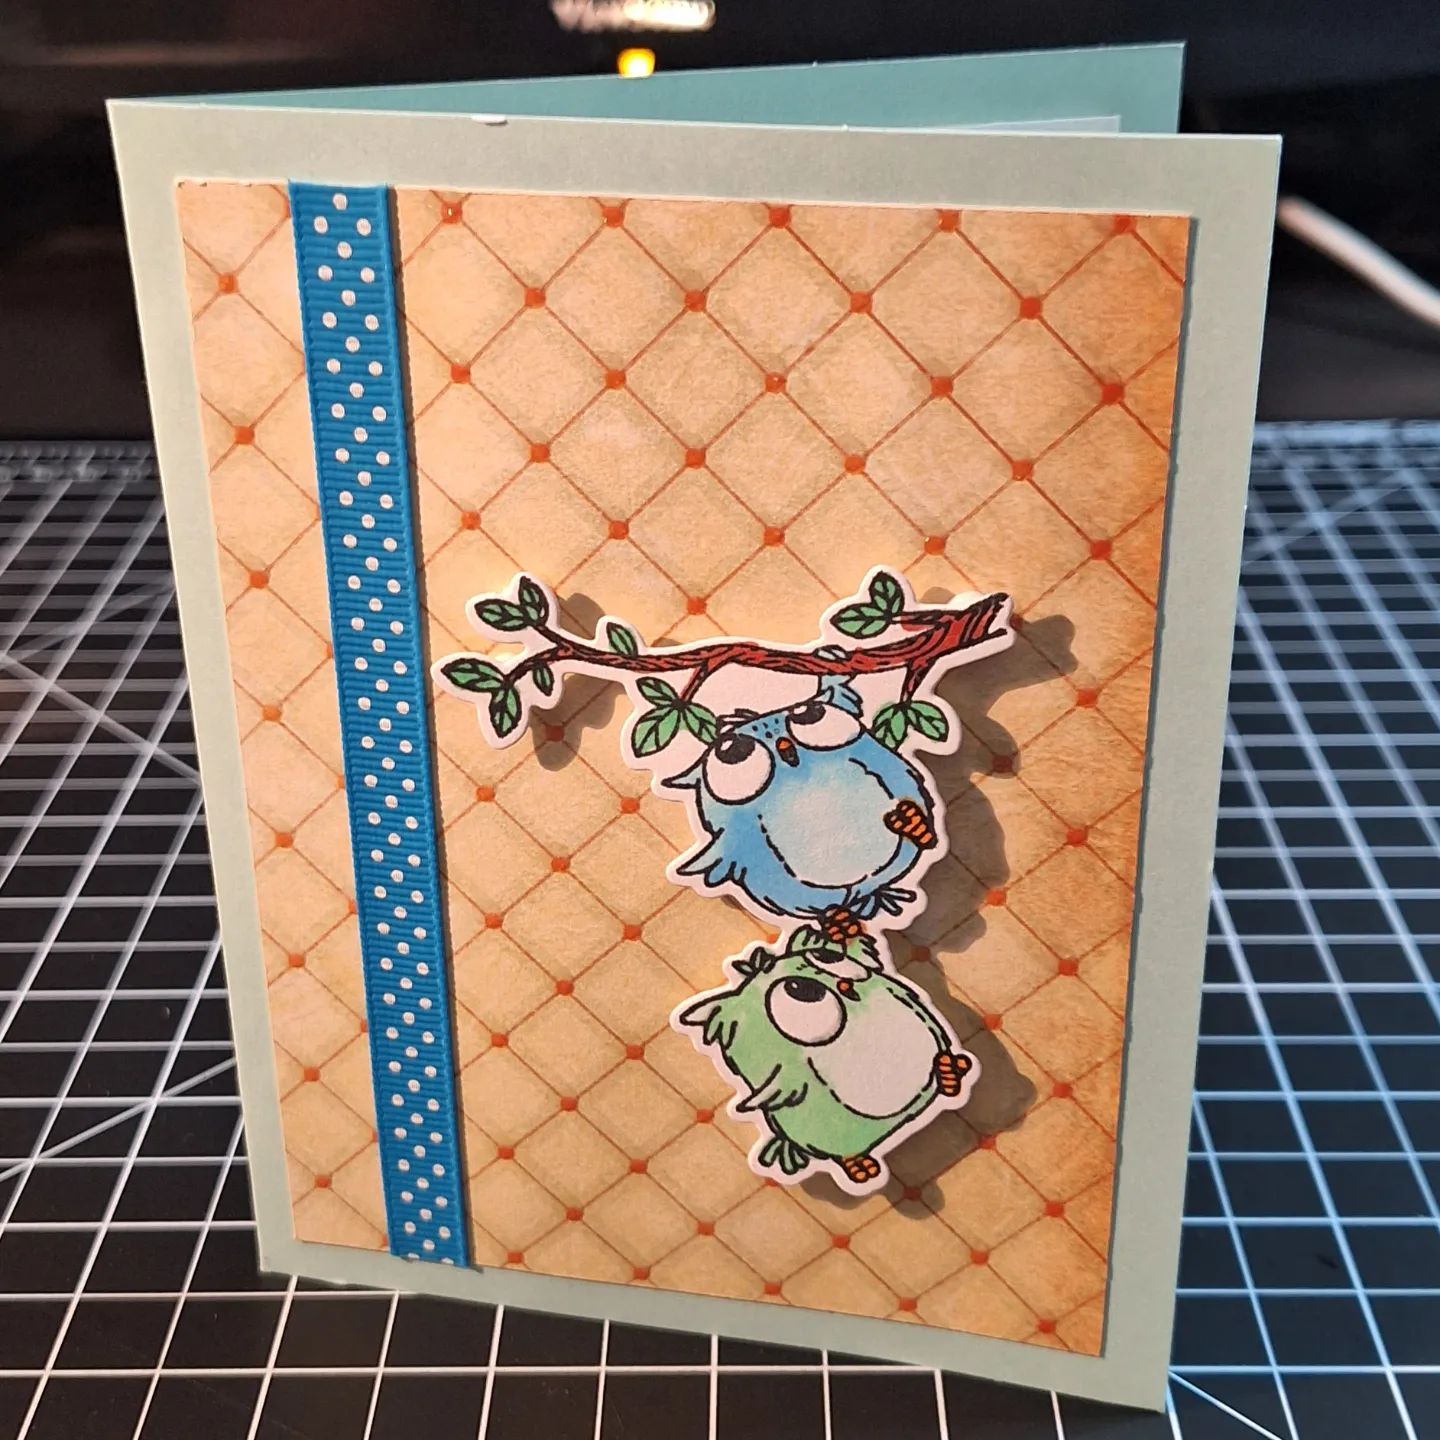 I made some cards, and the inside was screwed up, but the outside came out well! #card #cardmaking #papercraft #papercrafts #owl